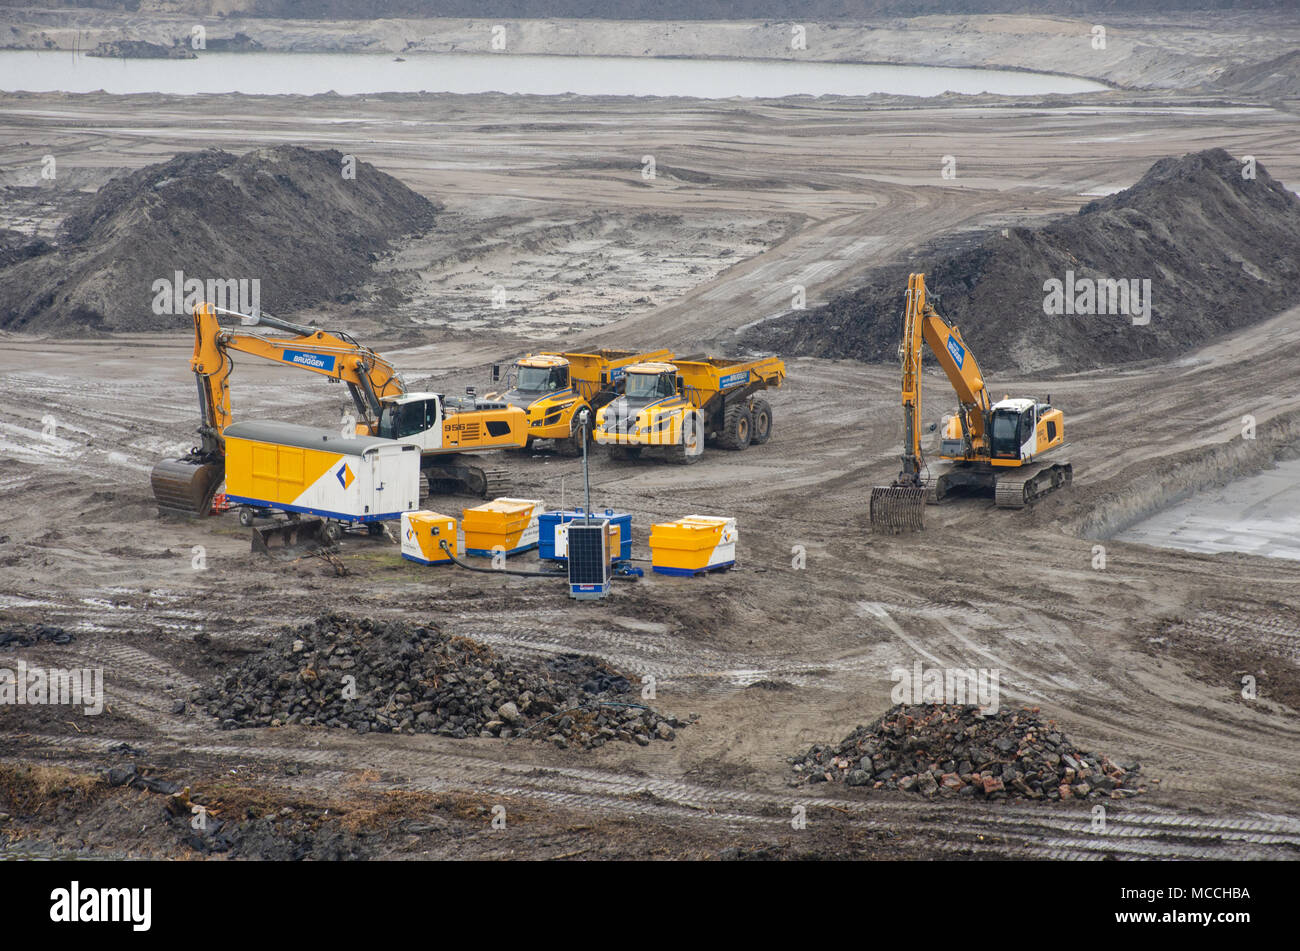 North Sea Canal Amsterdam Netherlands - 1 April 2018: Yellow earth moving equipment on landfill site Stock Photo